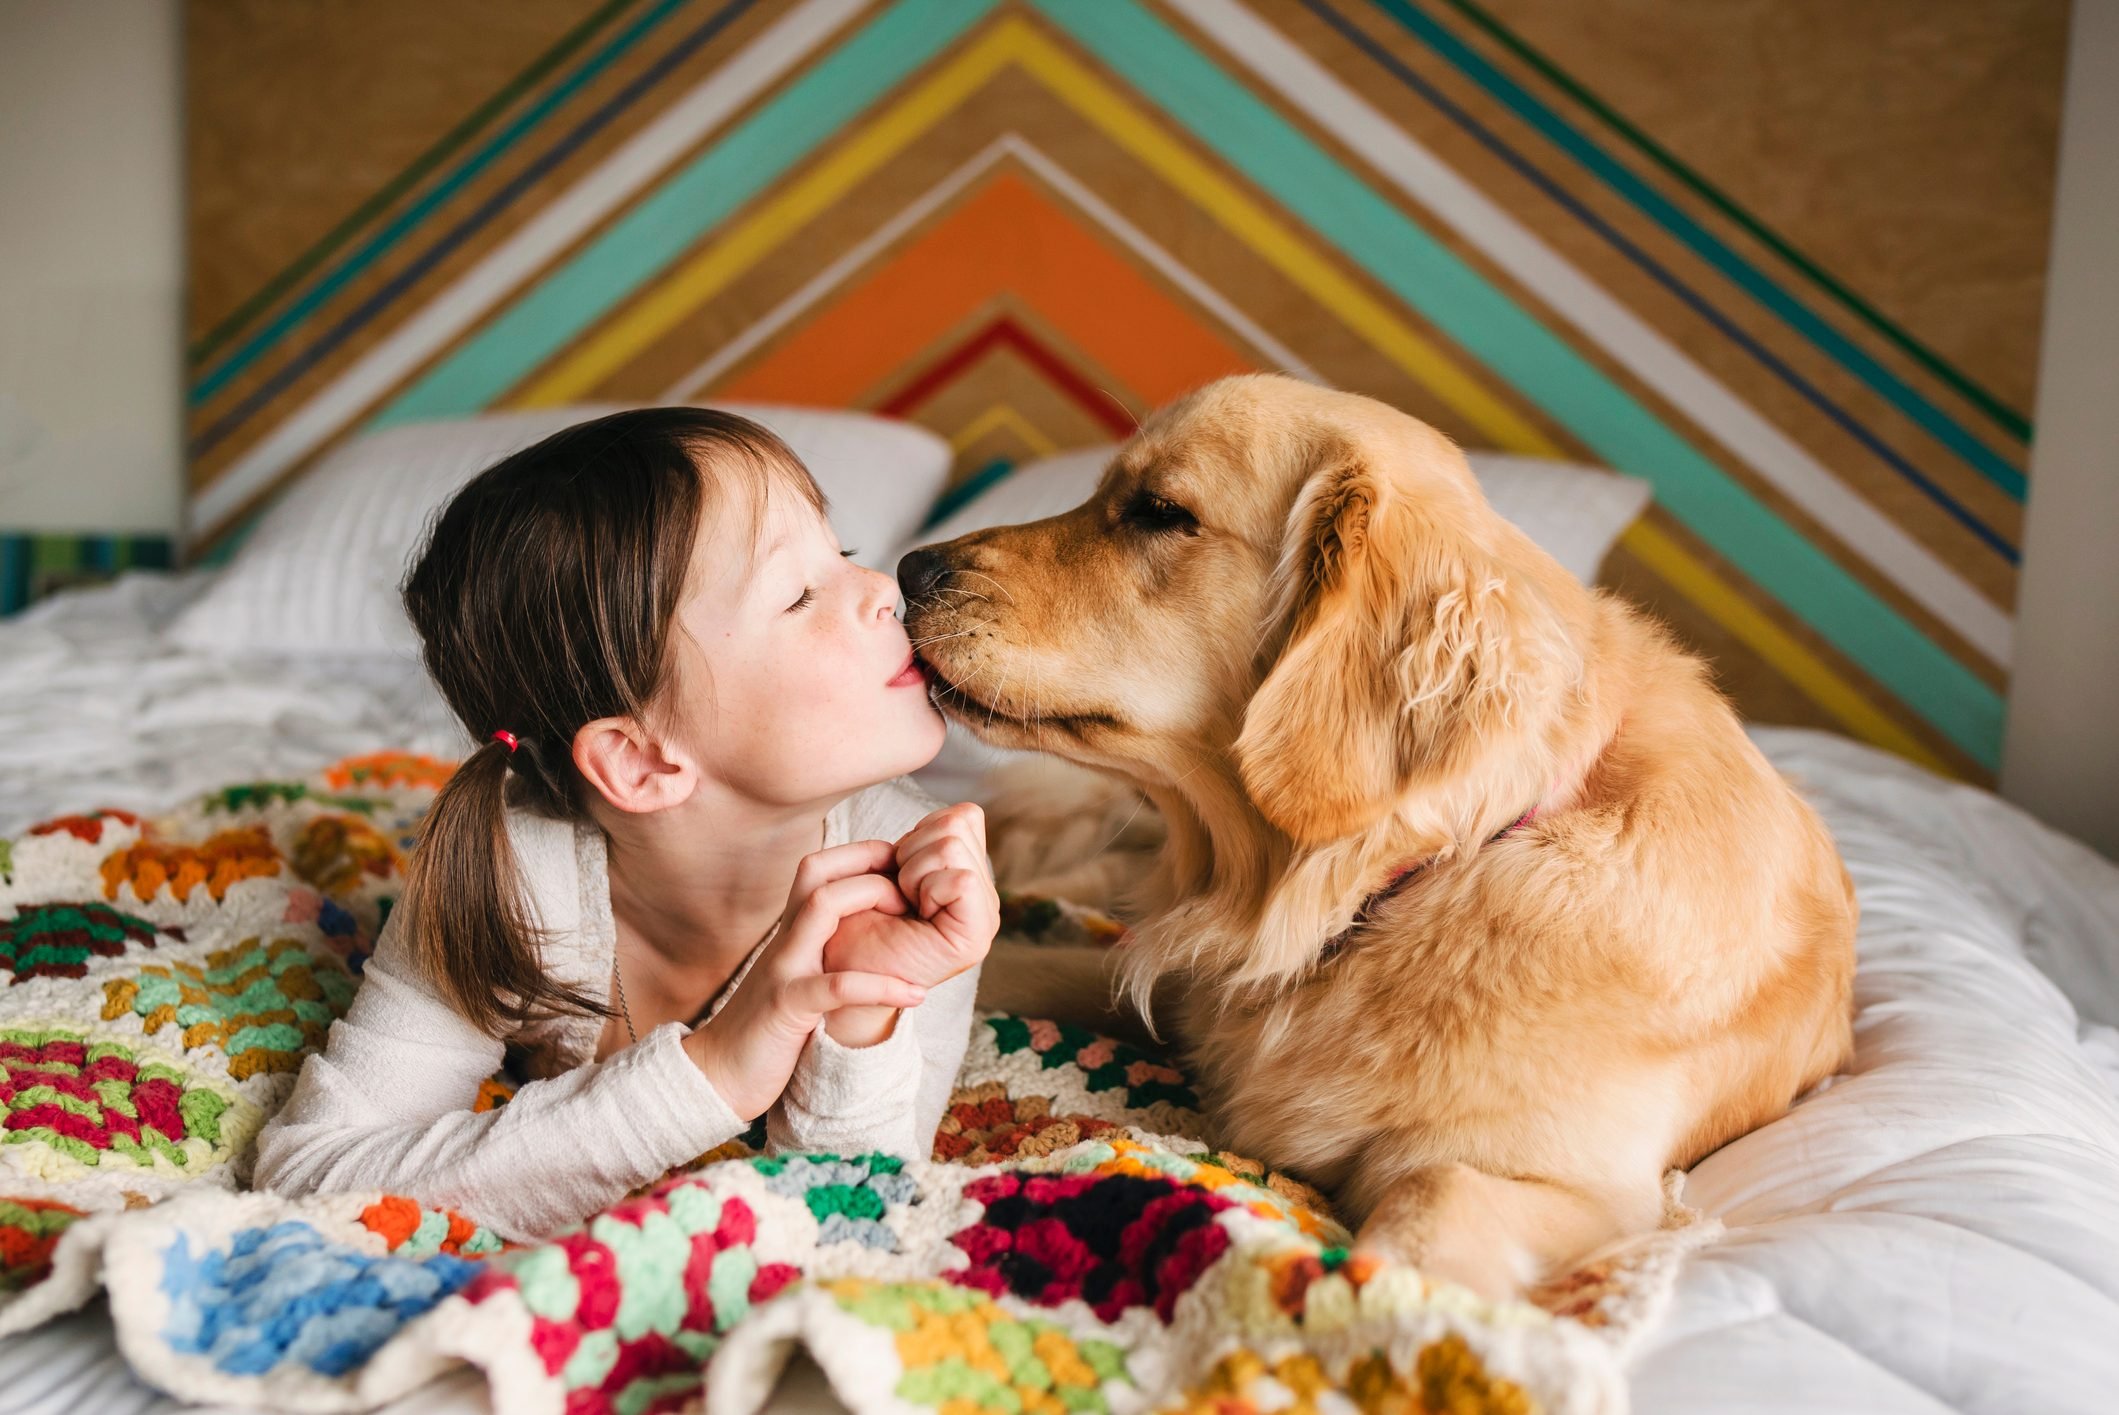 10 Most Popular Hound Dog Breeds - In Love With All Things Cozy